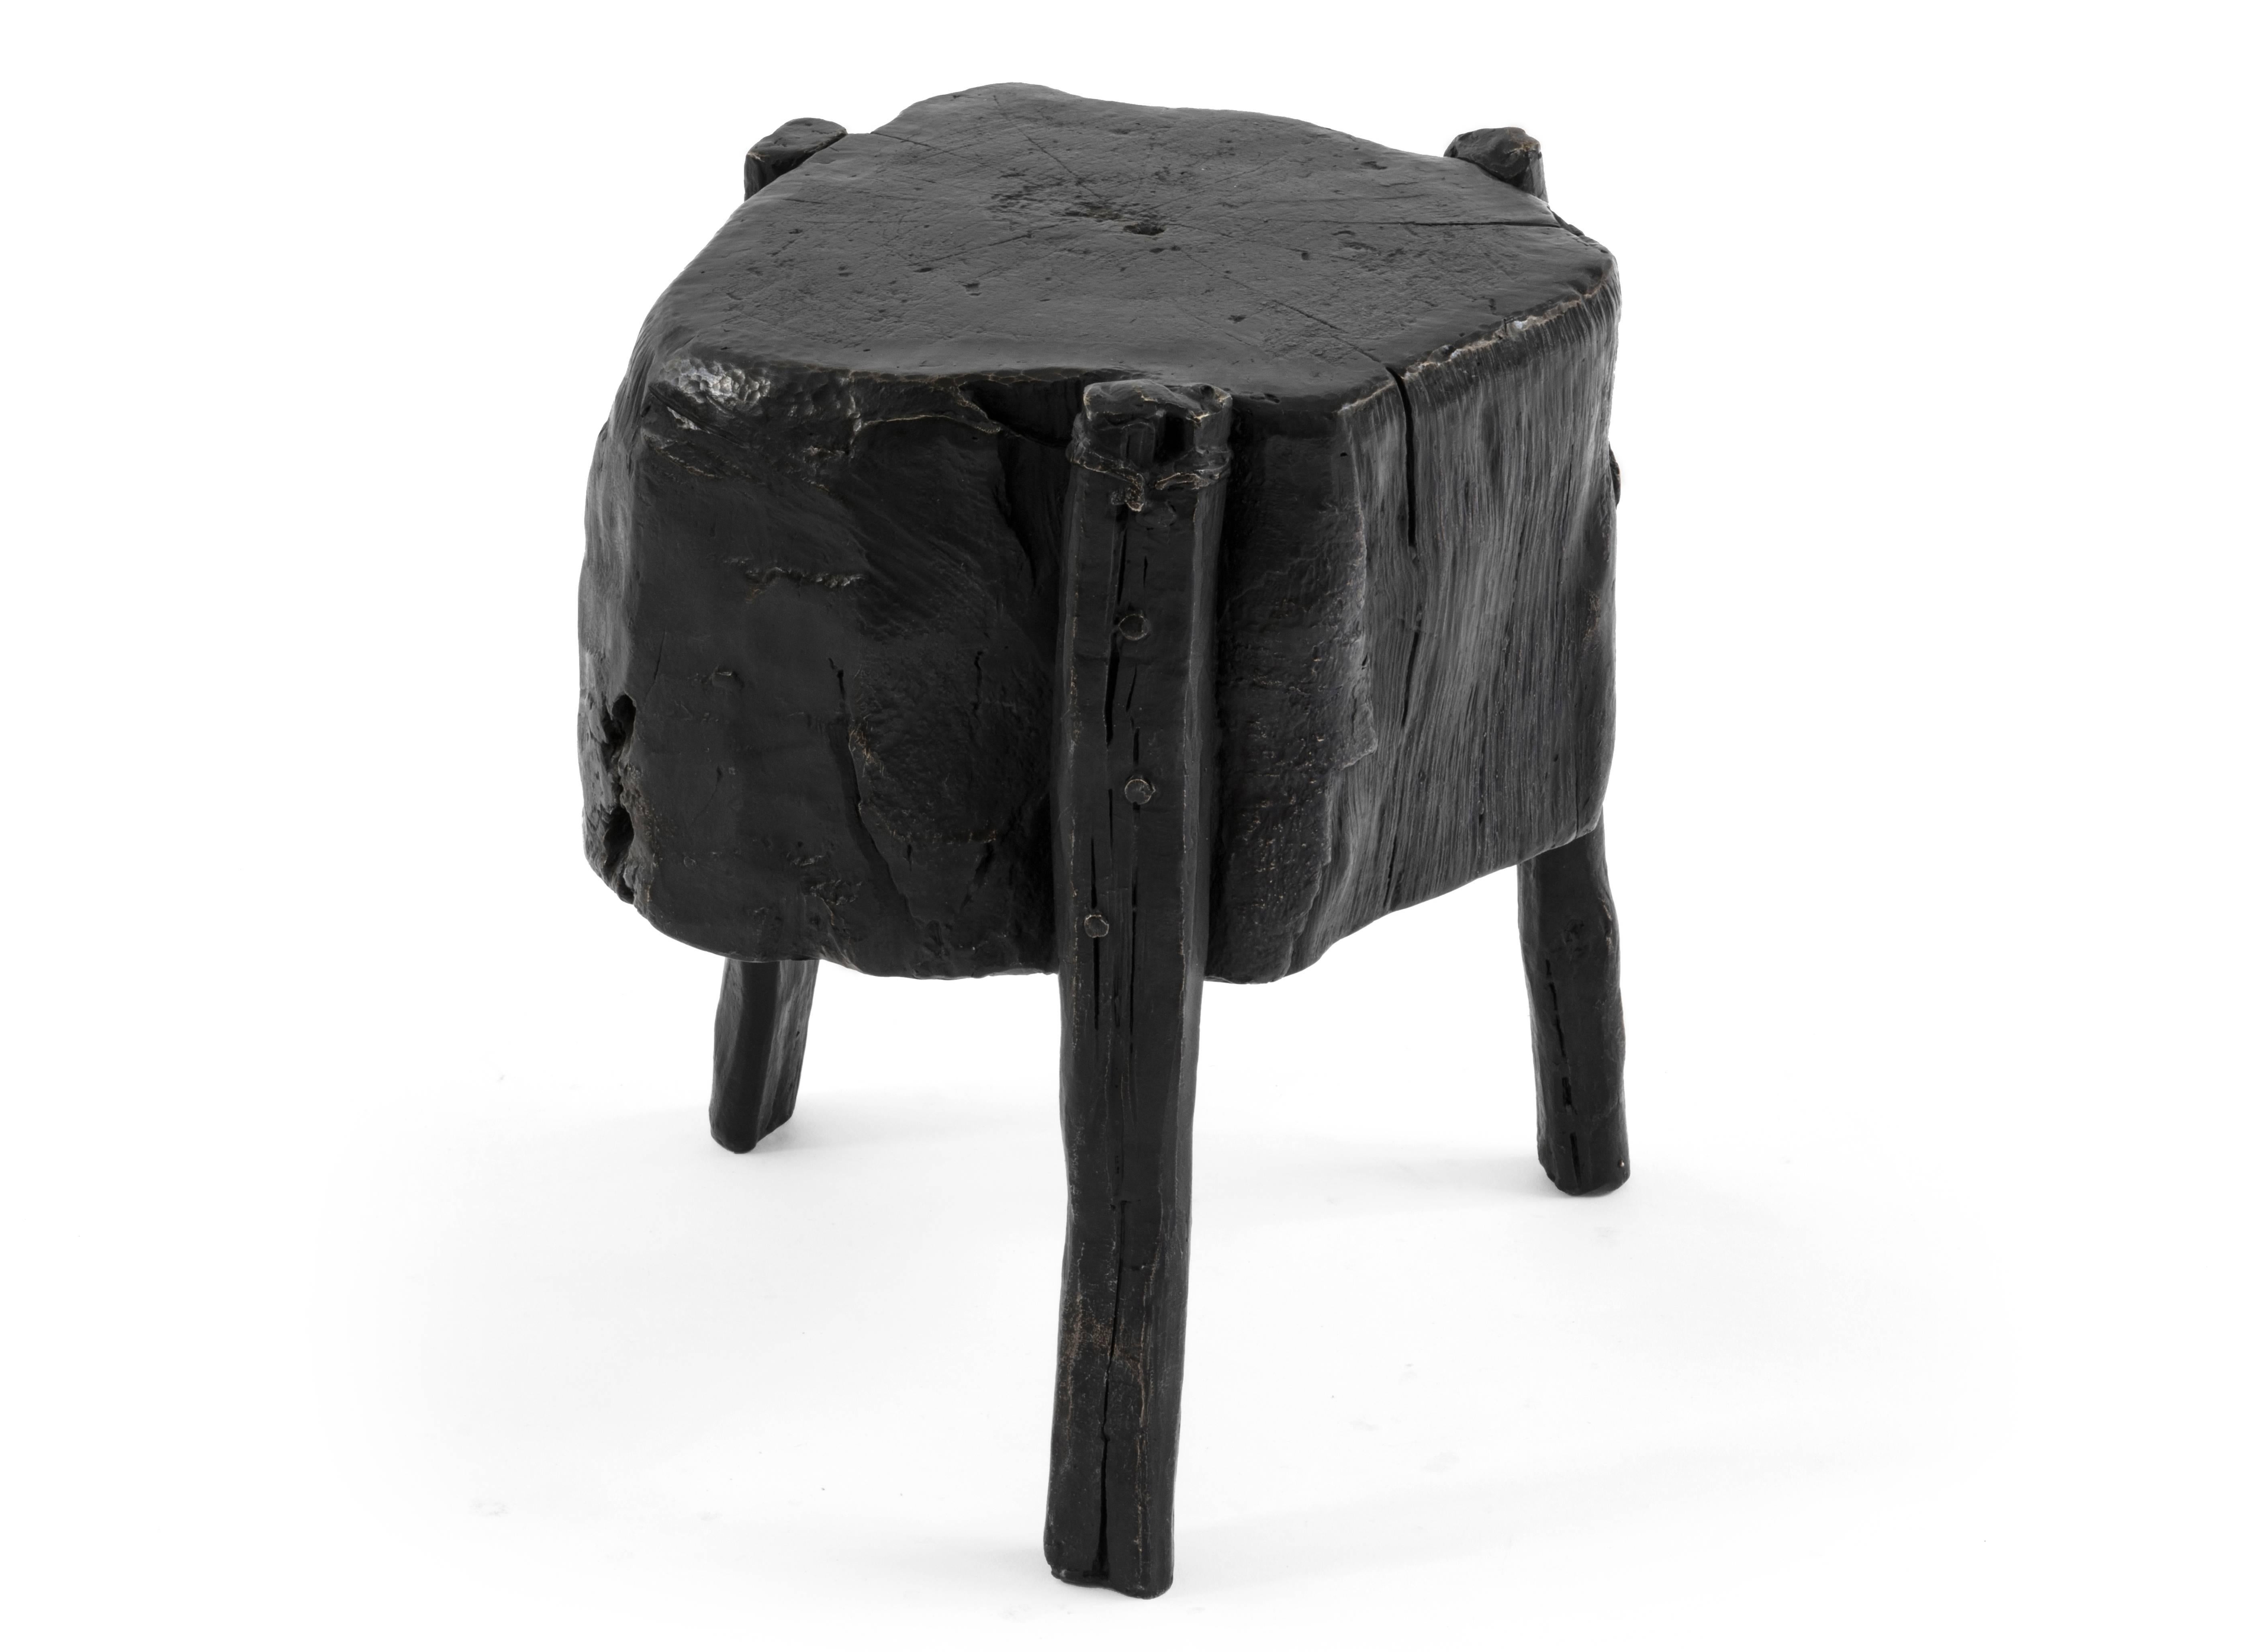 Hand-Crafted S.R.O Memoria Stool #1 by Ewe Studio For Sale